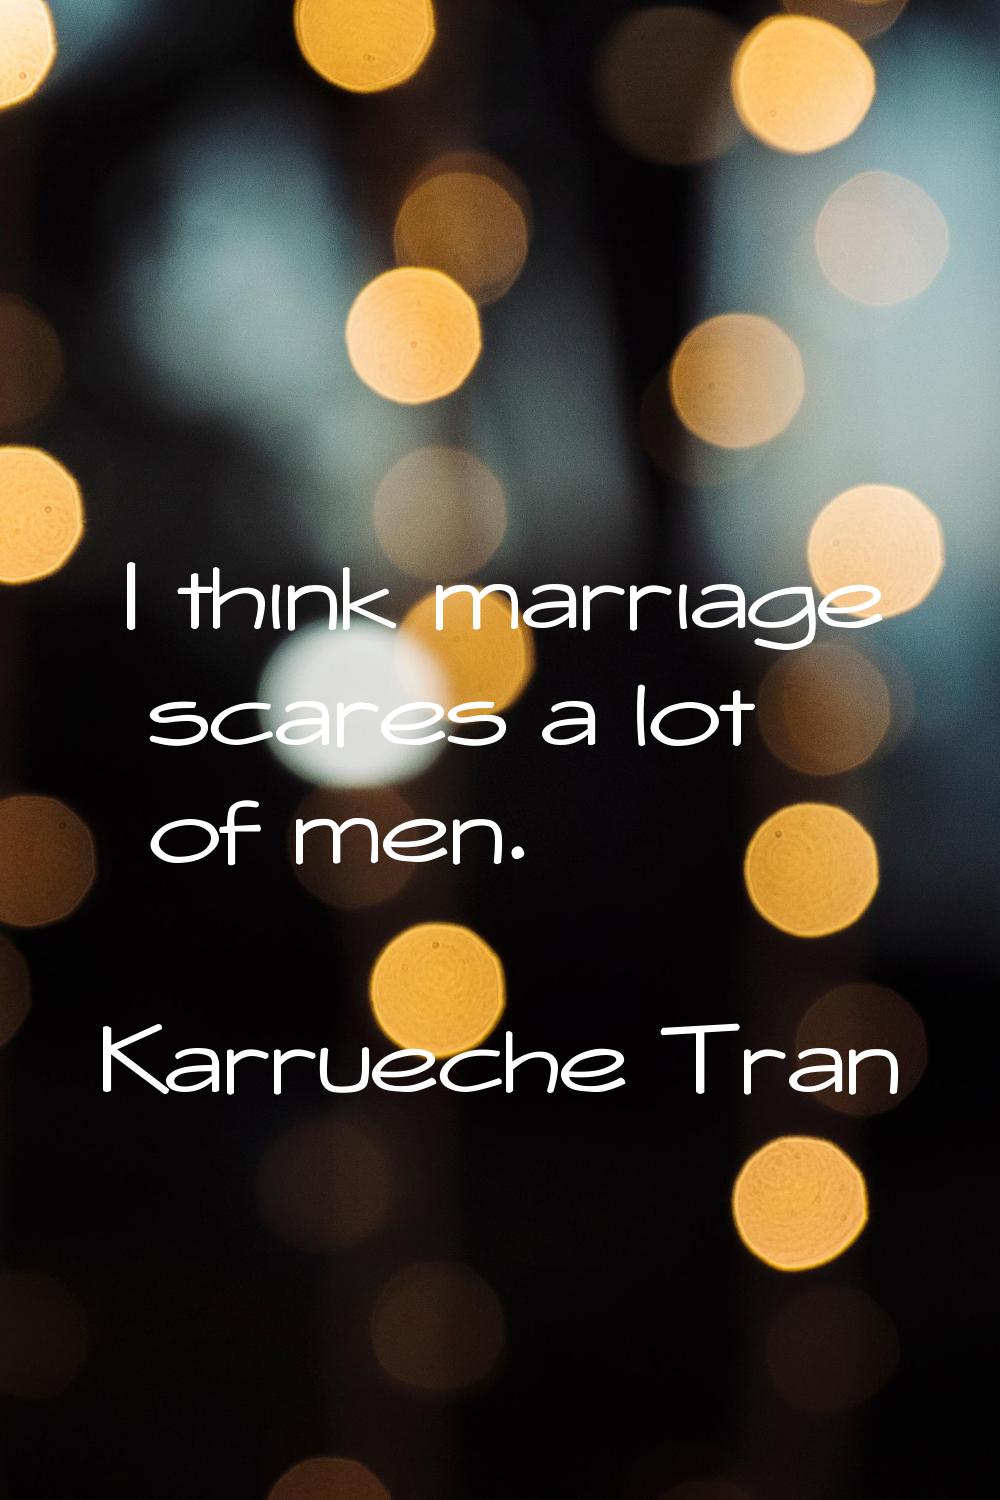 I think marriage scares a lot of men.